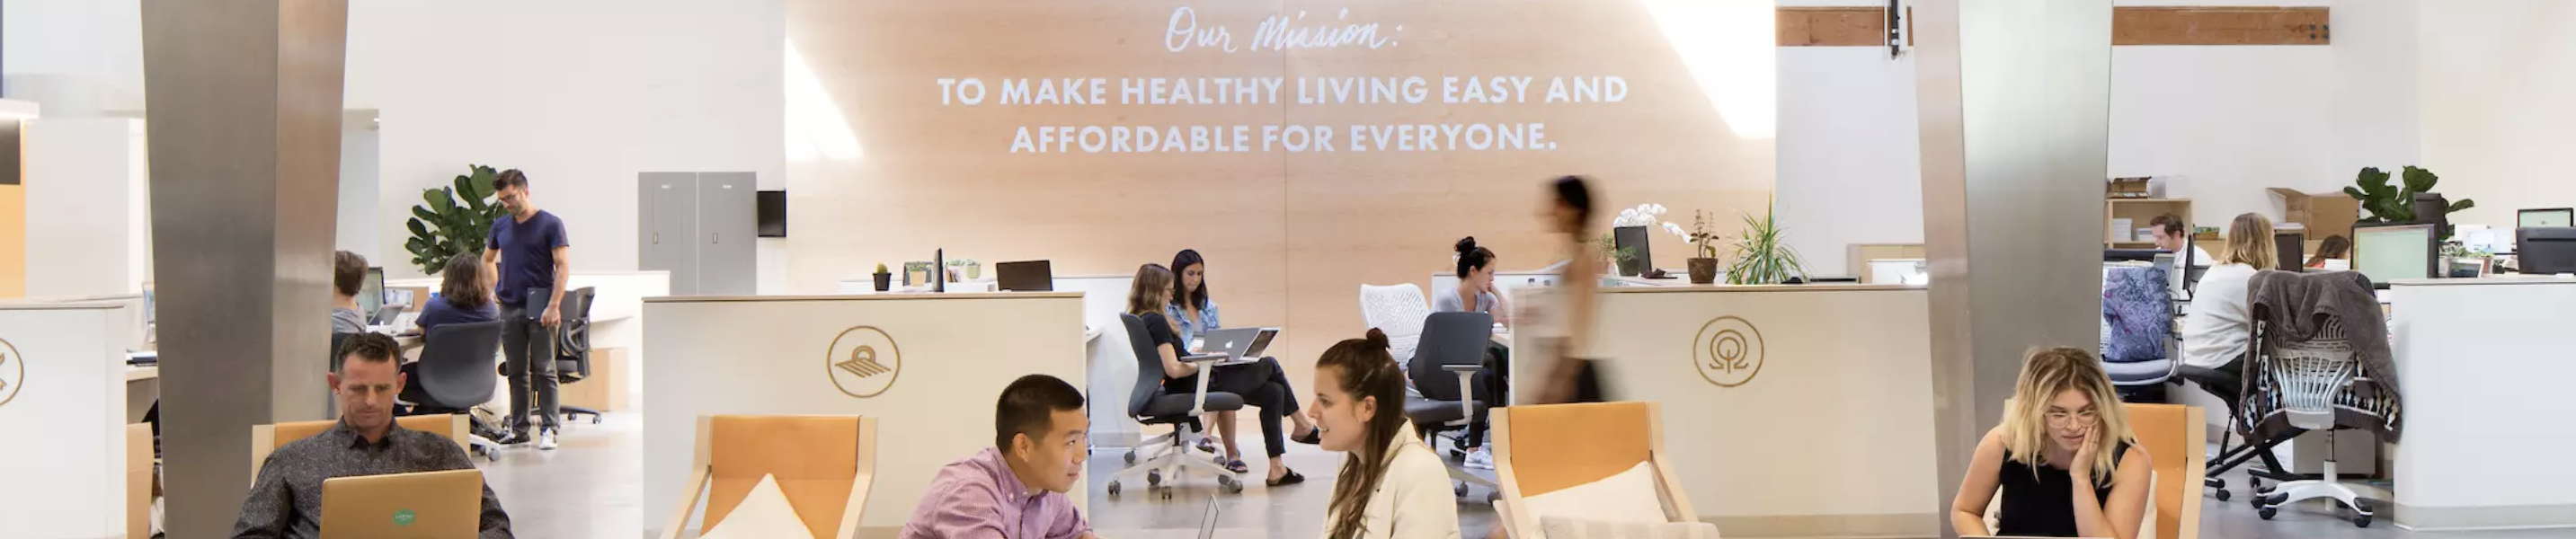 Thrive Market featured on Built in LA’s 100 Best Places to Work in Los Angeles 2021